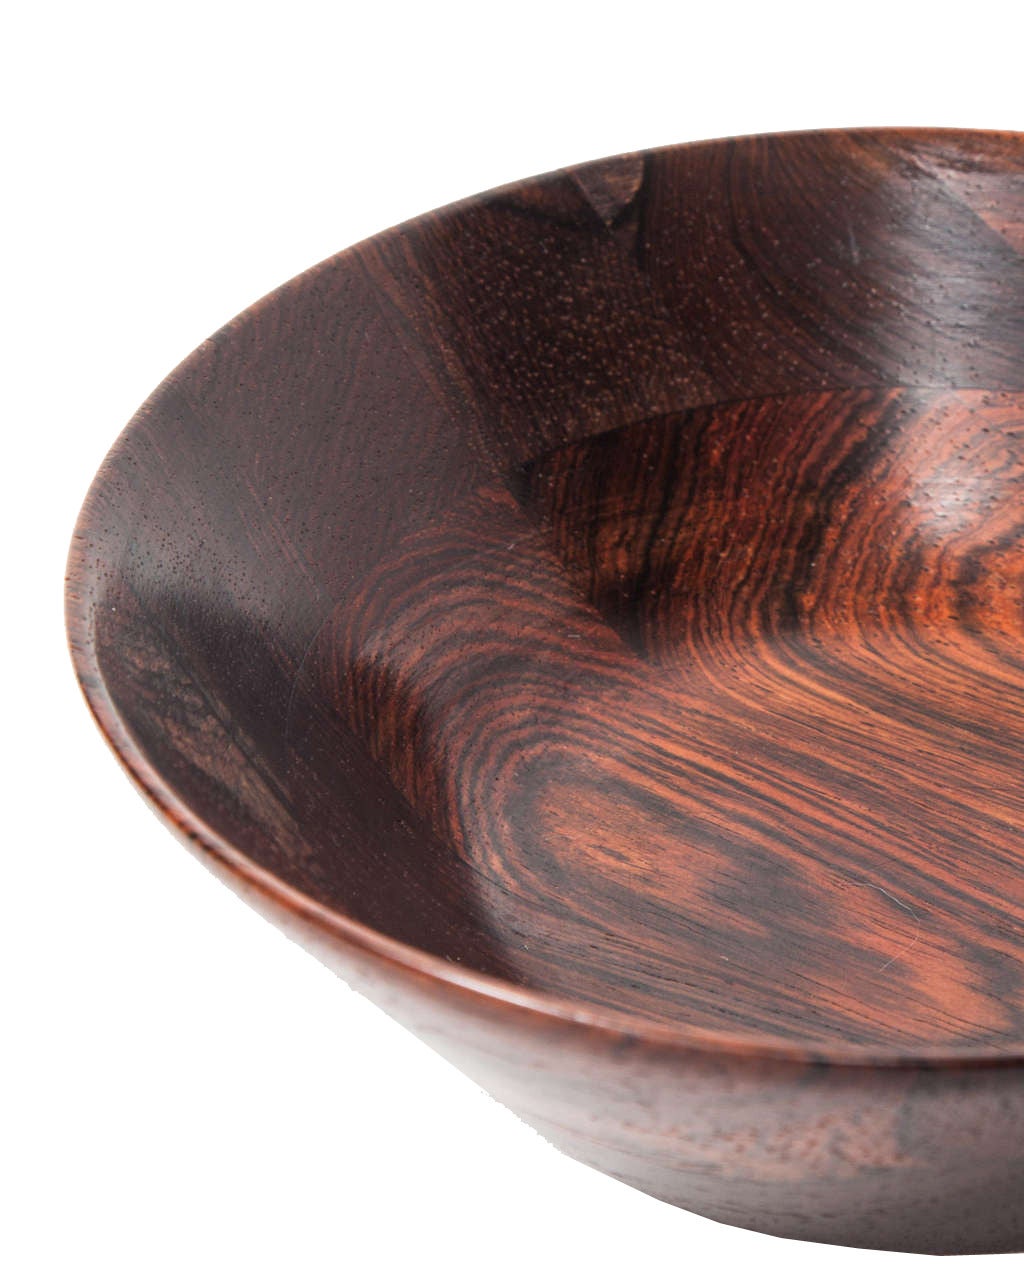 Turned Trio of Danish Rosewood Bowls by Laurids Lonborg for Illums Bolighus